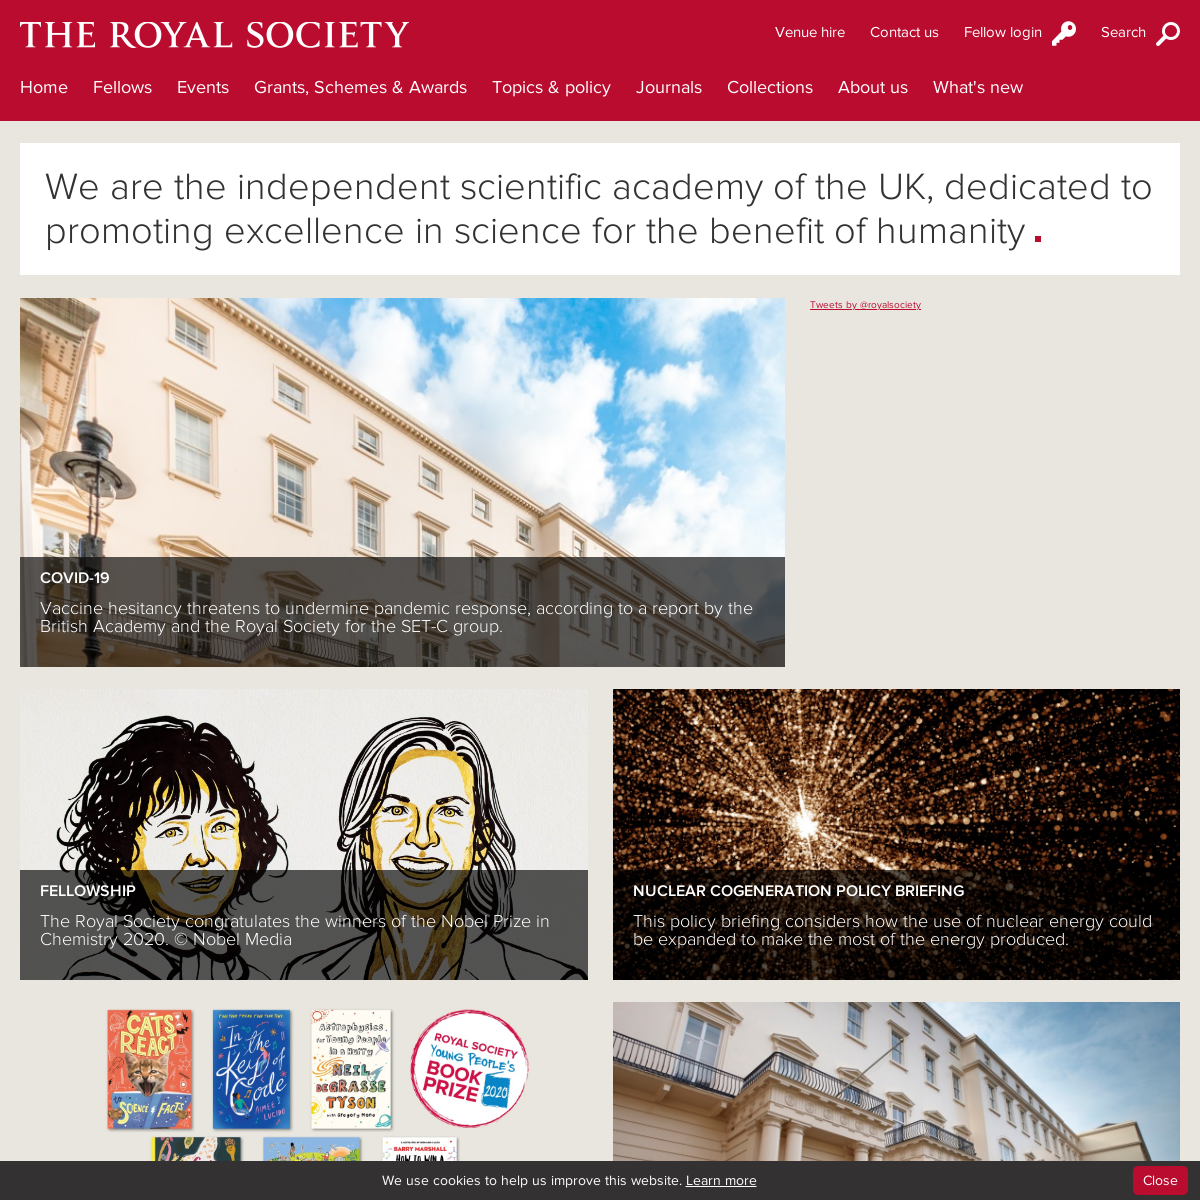 A complete backup of royalsociety.org